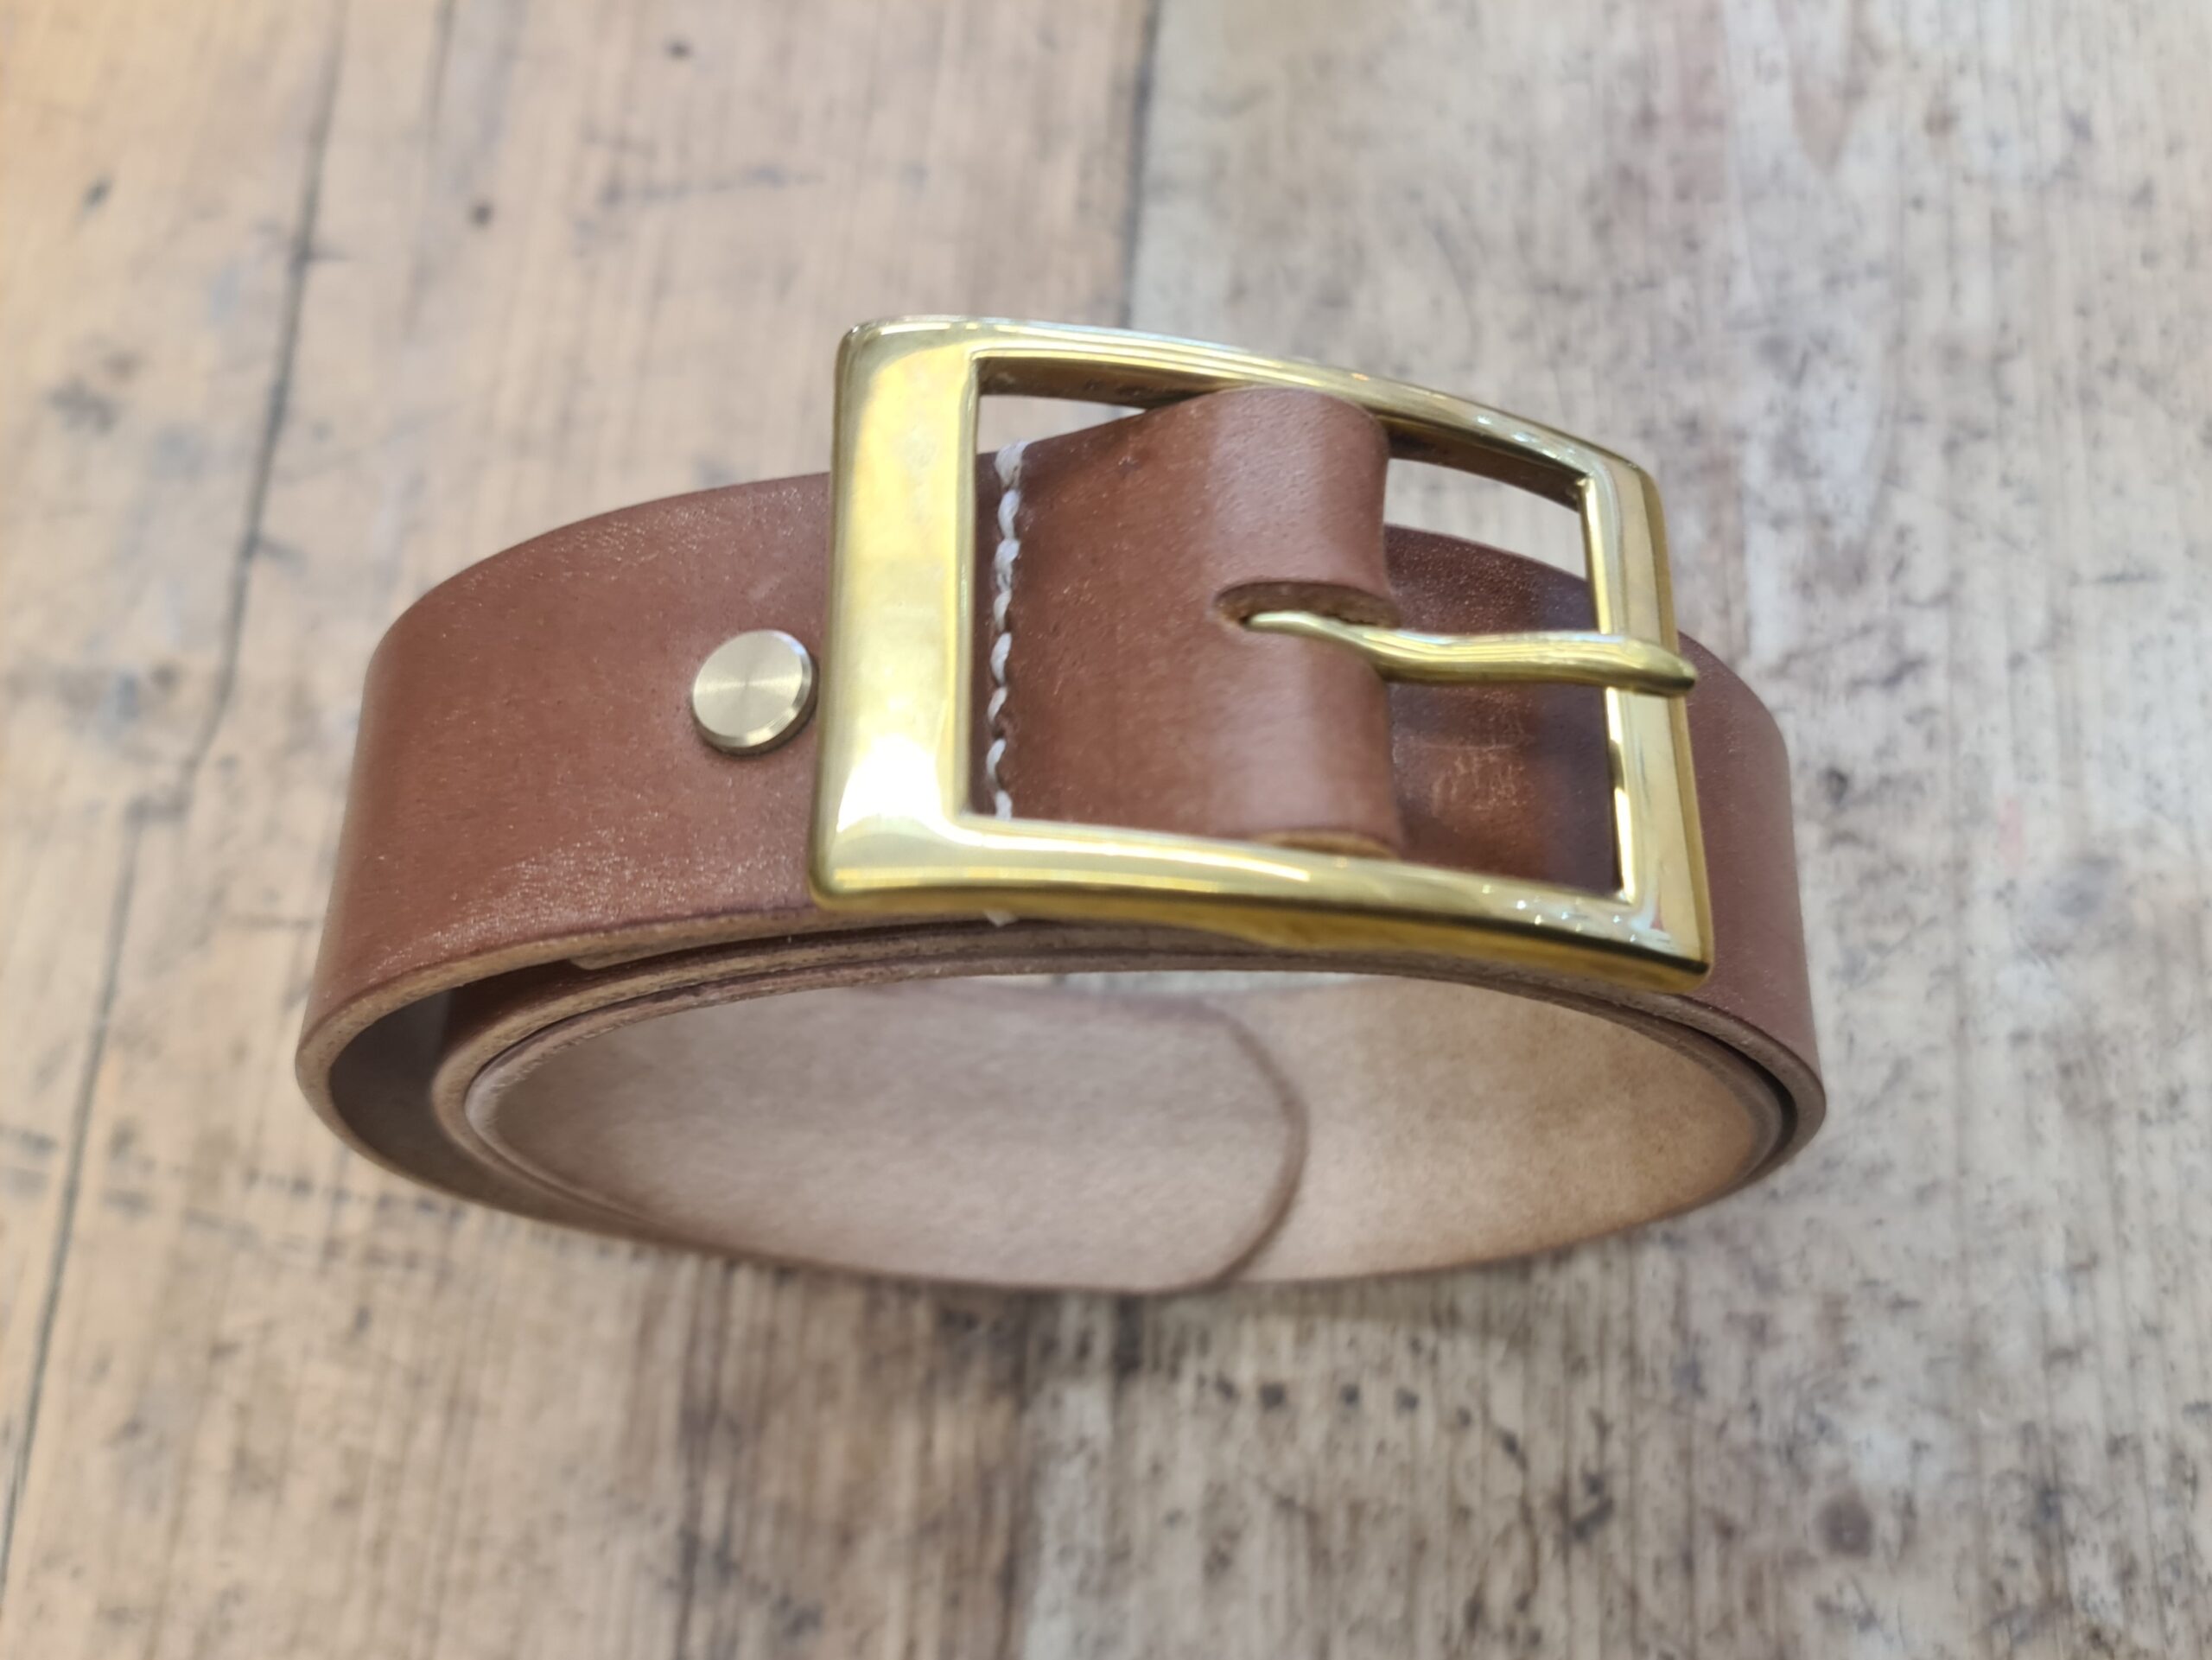 Carrion Handmade Yorkshire Belt - Brown Leather/Rounded Buckle - Furbellow  & Co